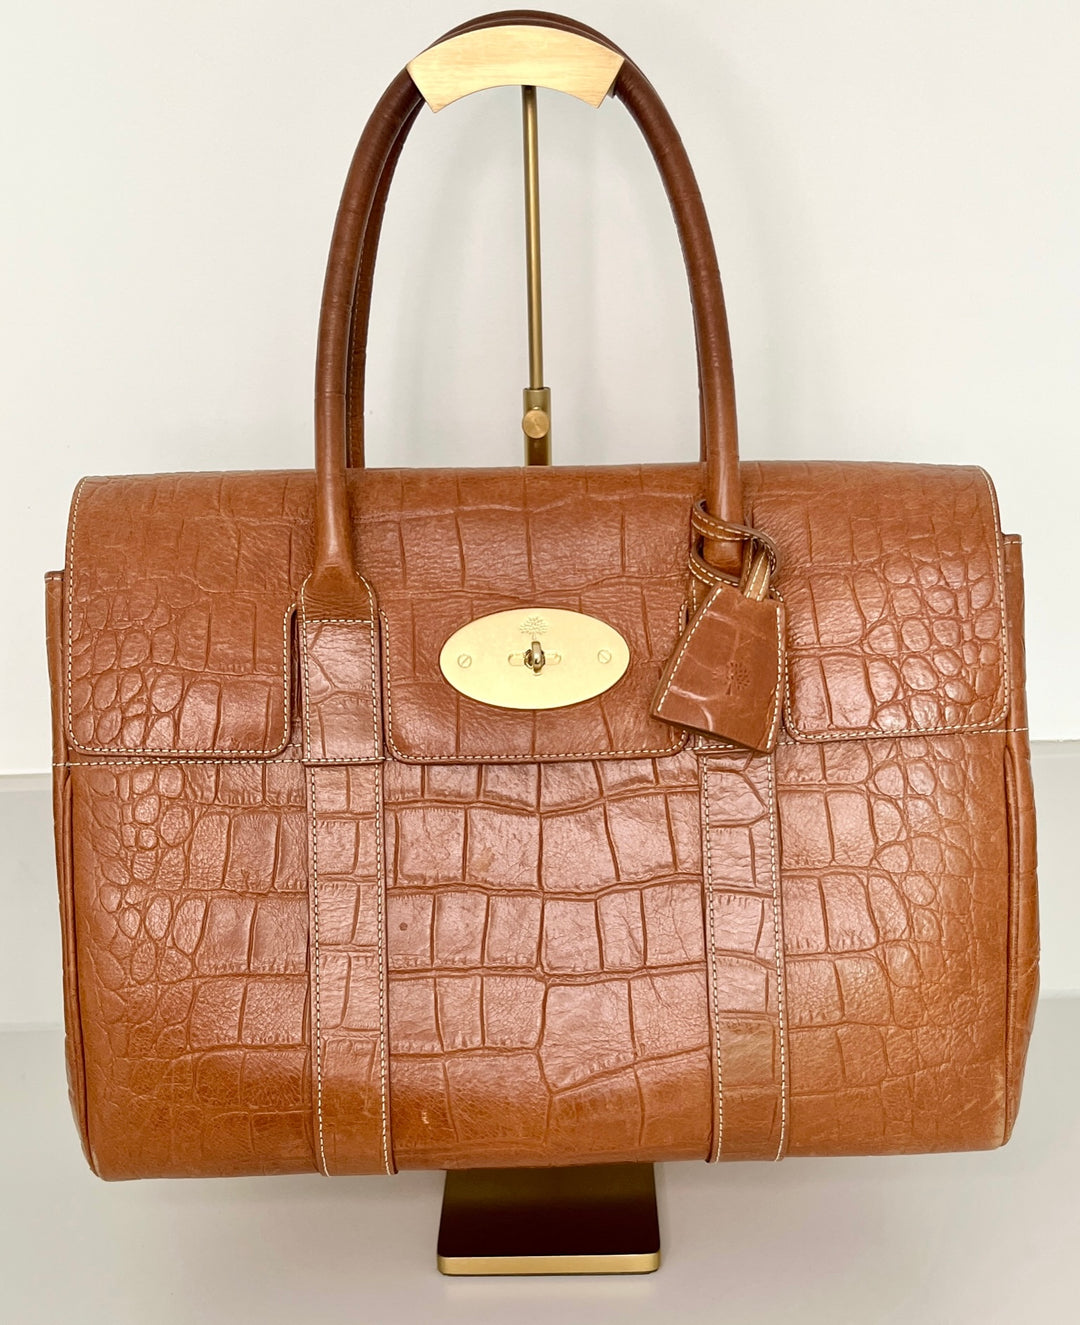 Mulberry and the Bayswater: A Legacy of British Craftsmanship